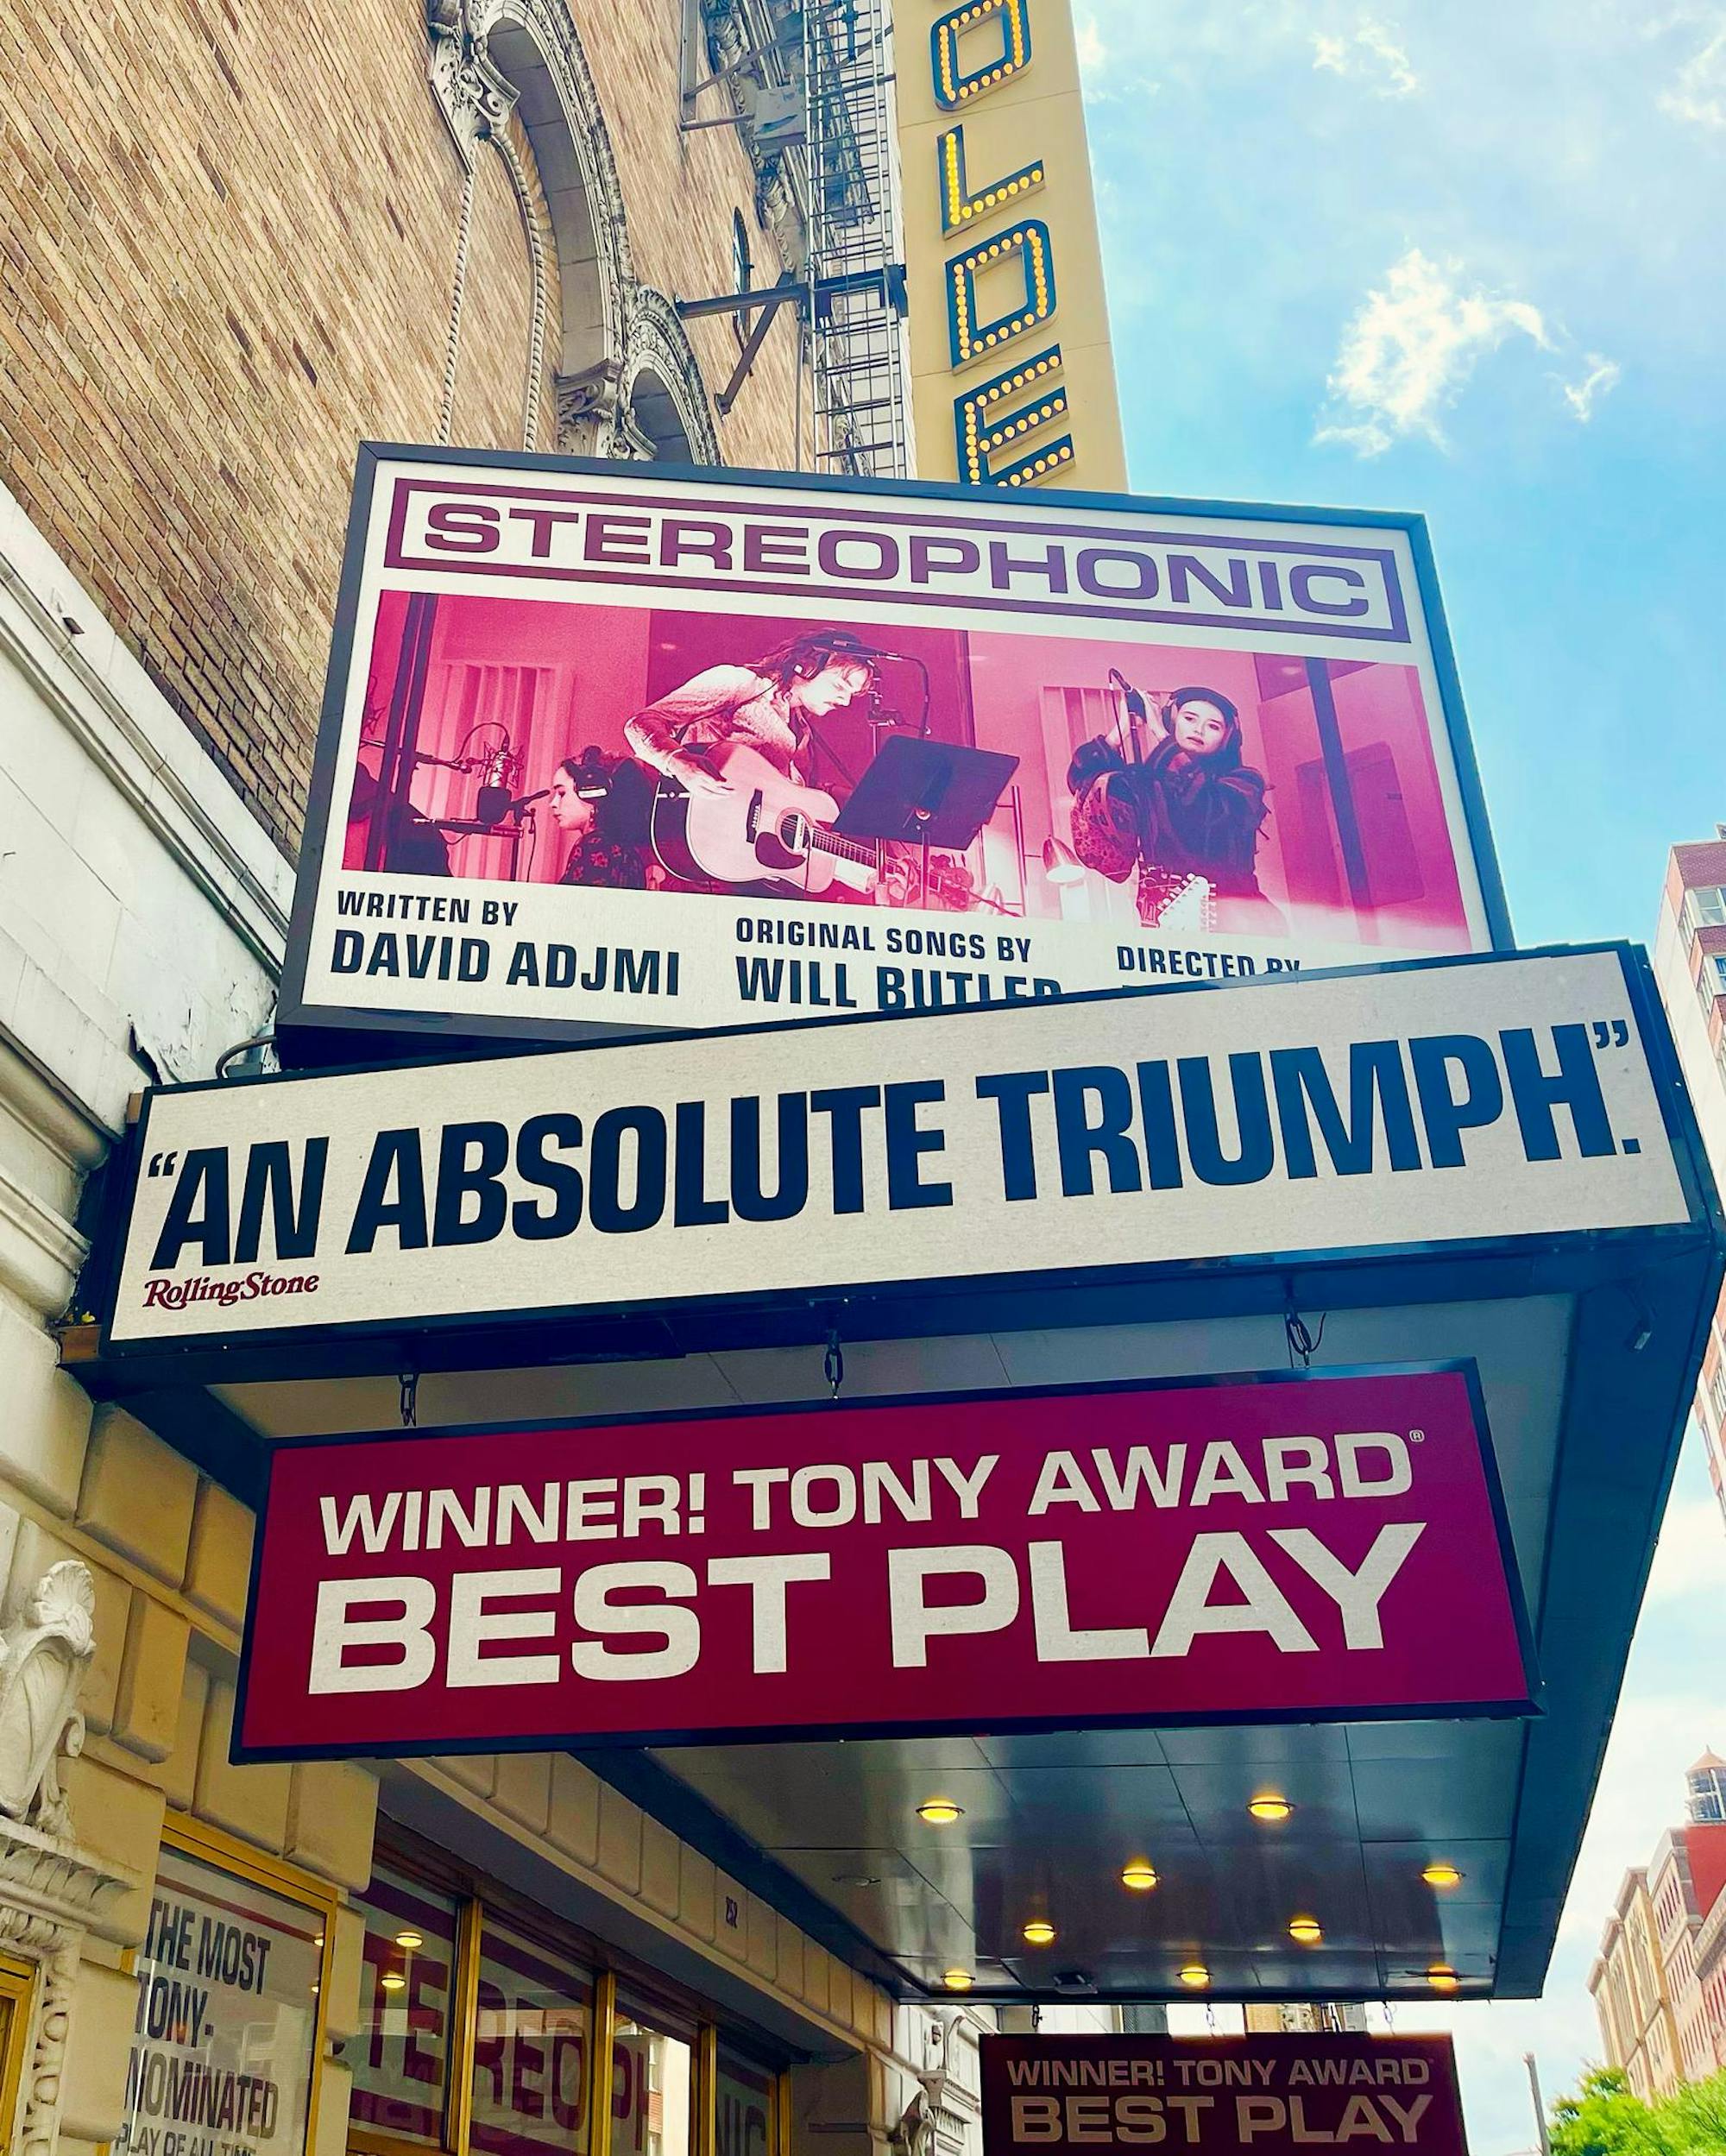 "Stereophonic" is playing on Broadway and was nominated for 13 Tony Awards, winning 5.